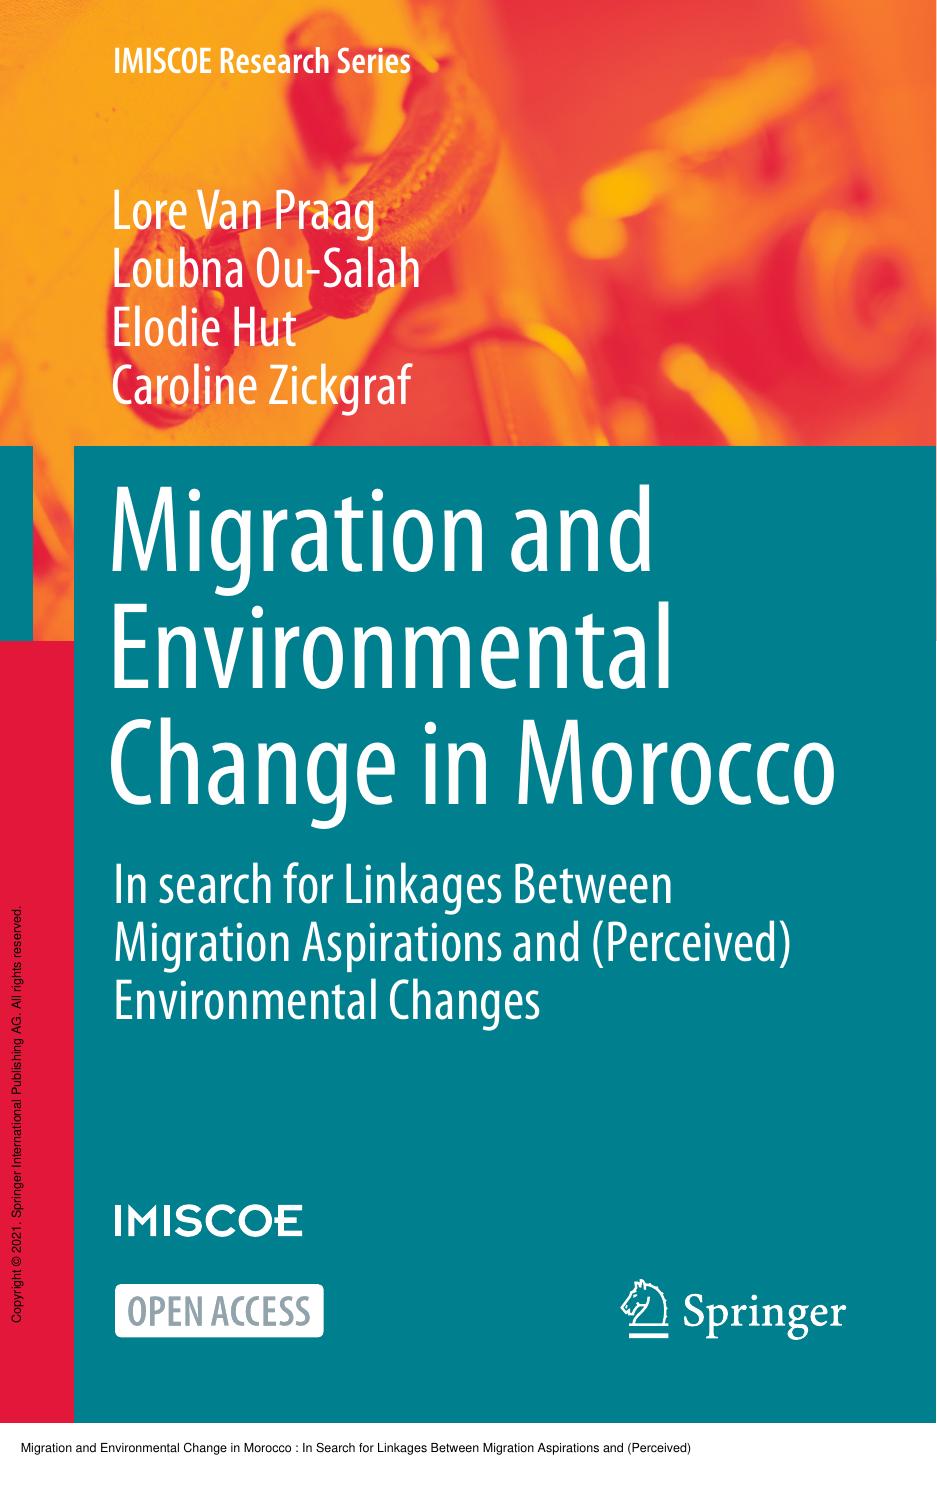 Migration and Environmental Change in Morocco : In Search for Linkages Between Migration Aspirations and (Perceived) Environmental Changes by Lore Van Praag; Loubna Ou-Salah; Elodie Hut; Caroline Zickgraf